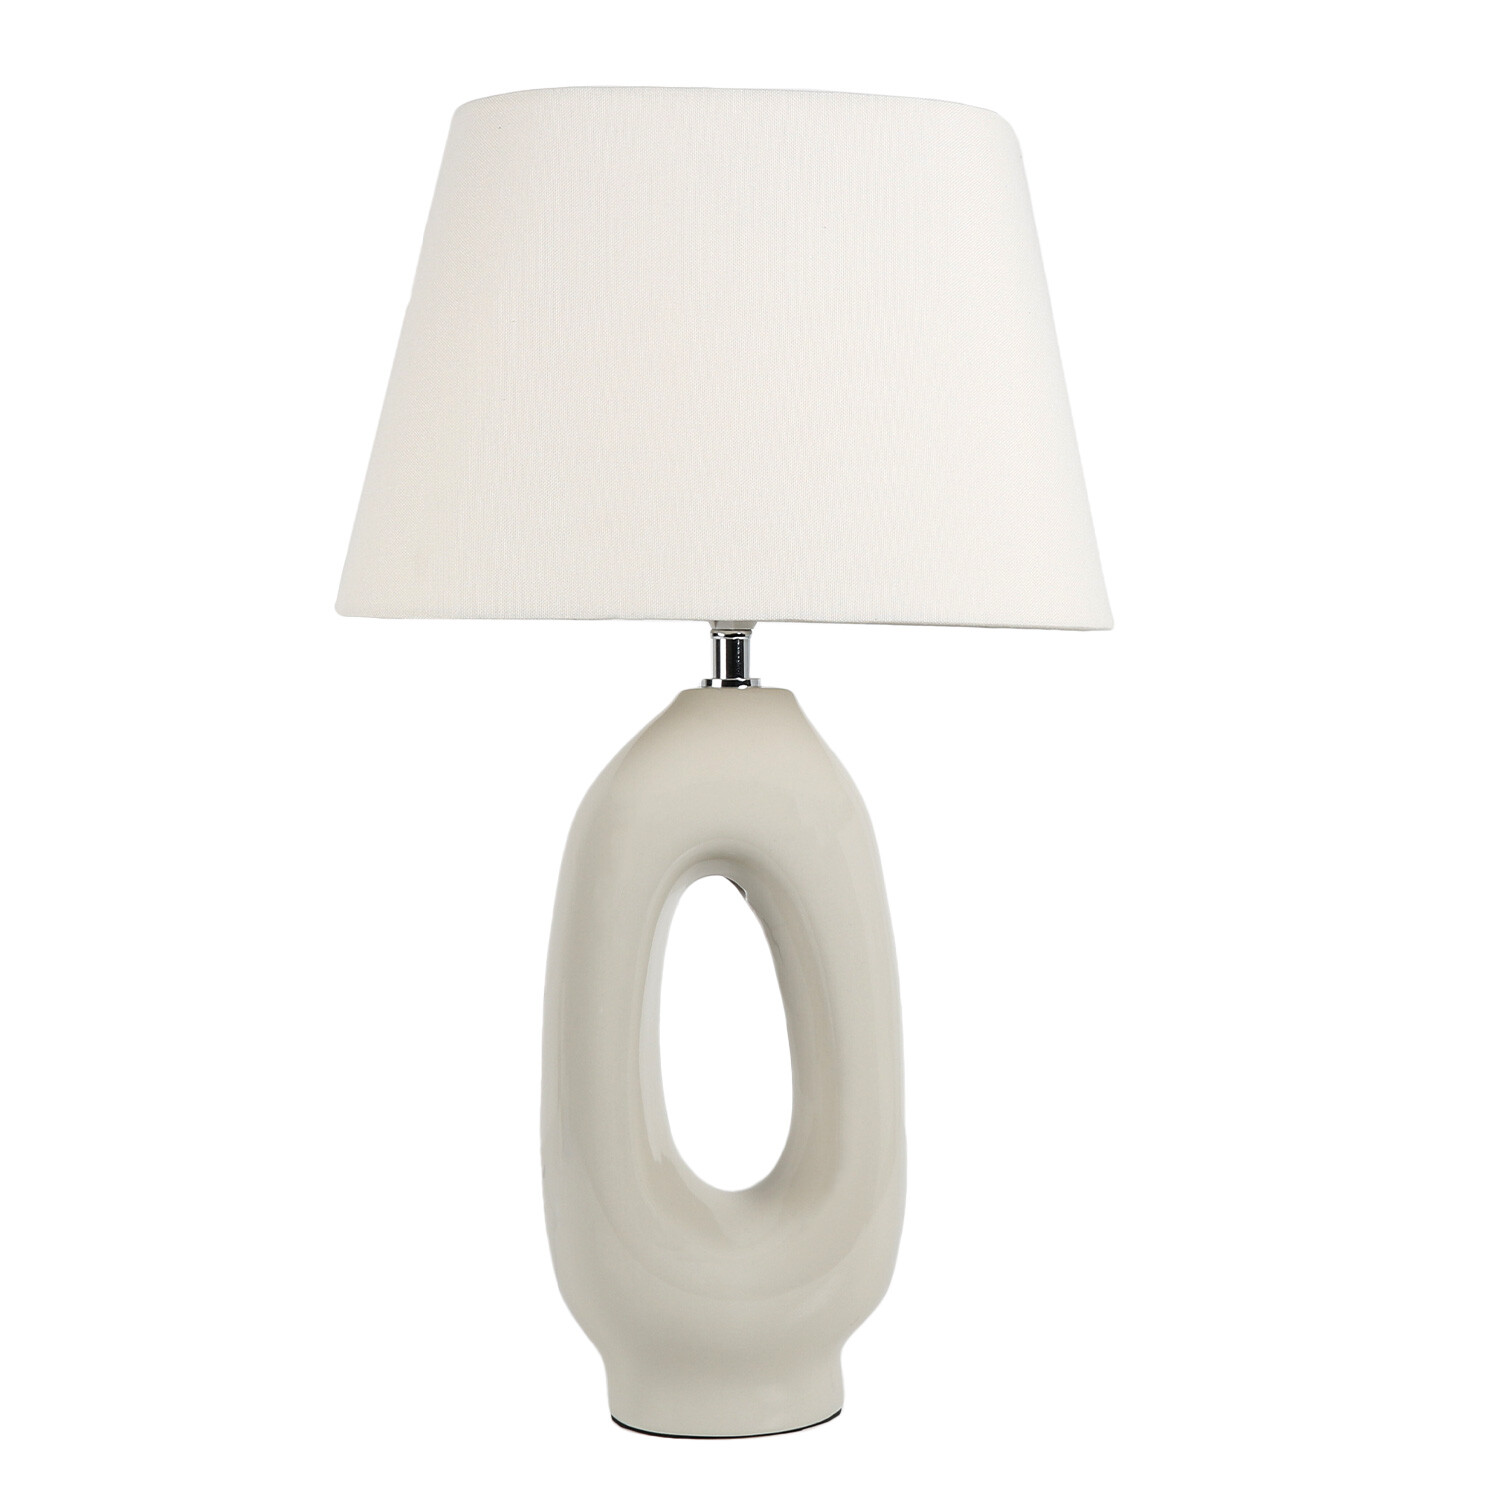 Single Harriet Oval Table Lamp in Assorted styles Image 1